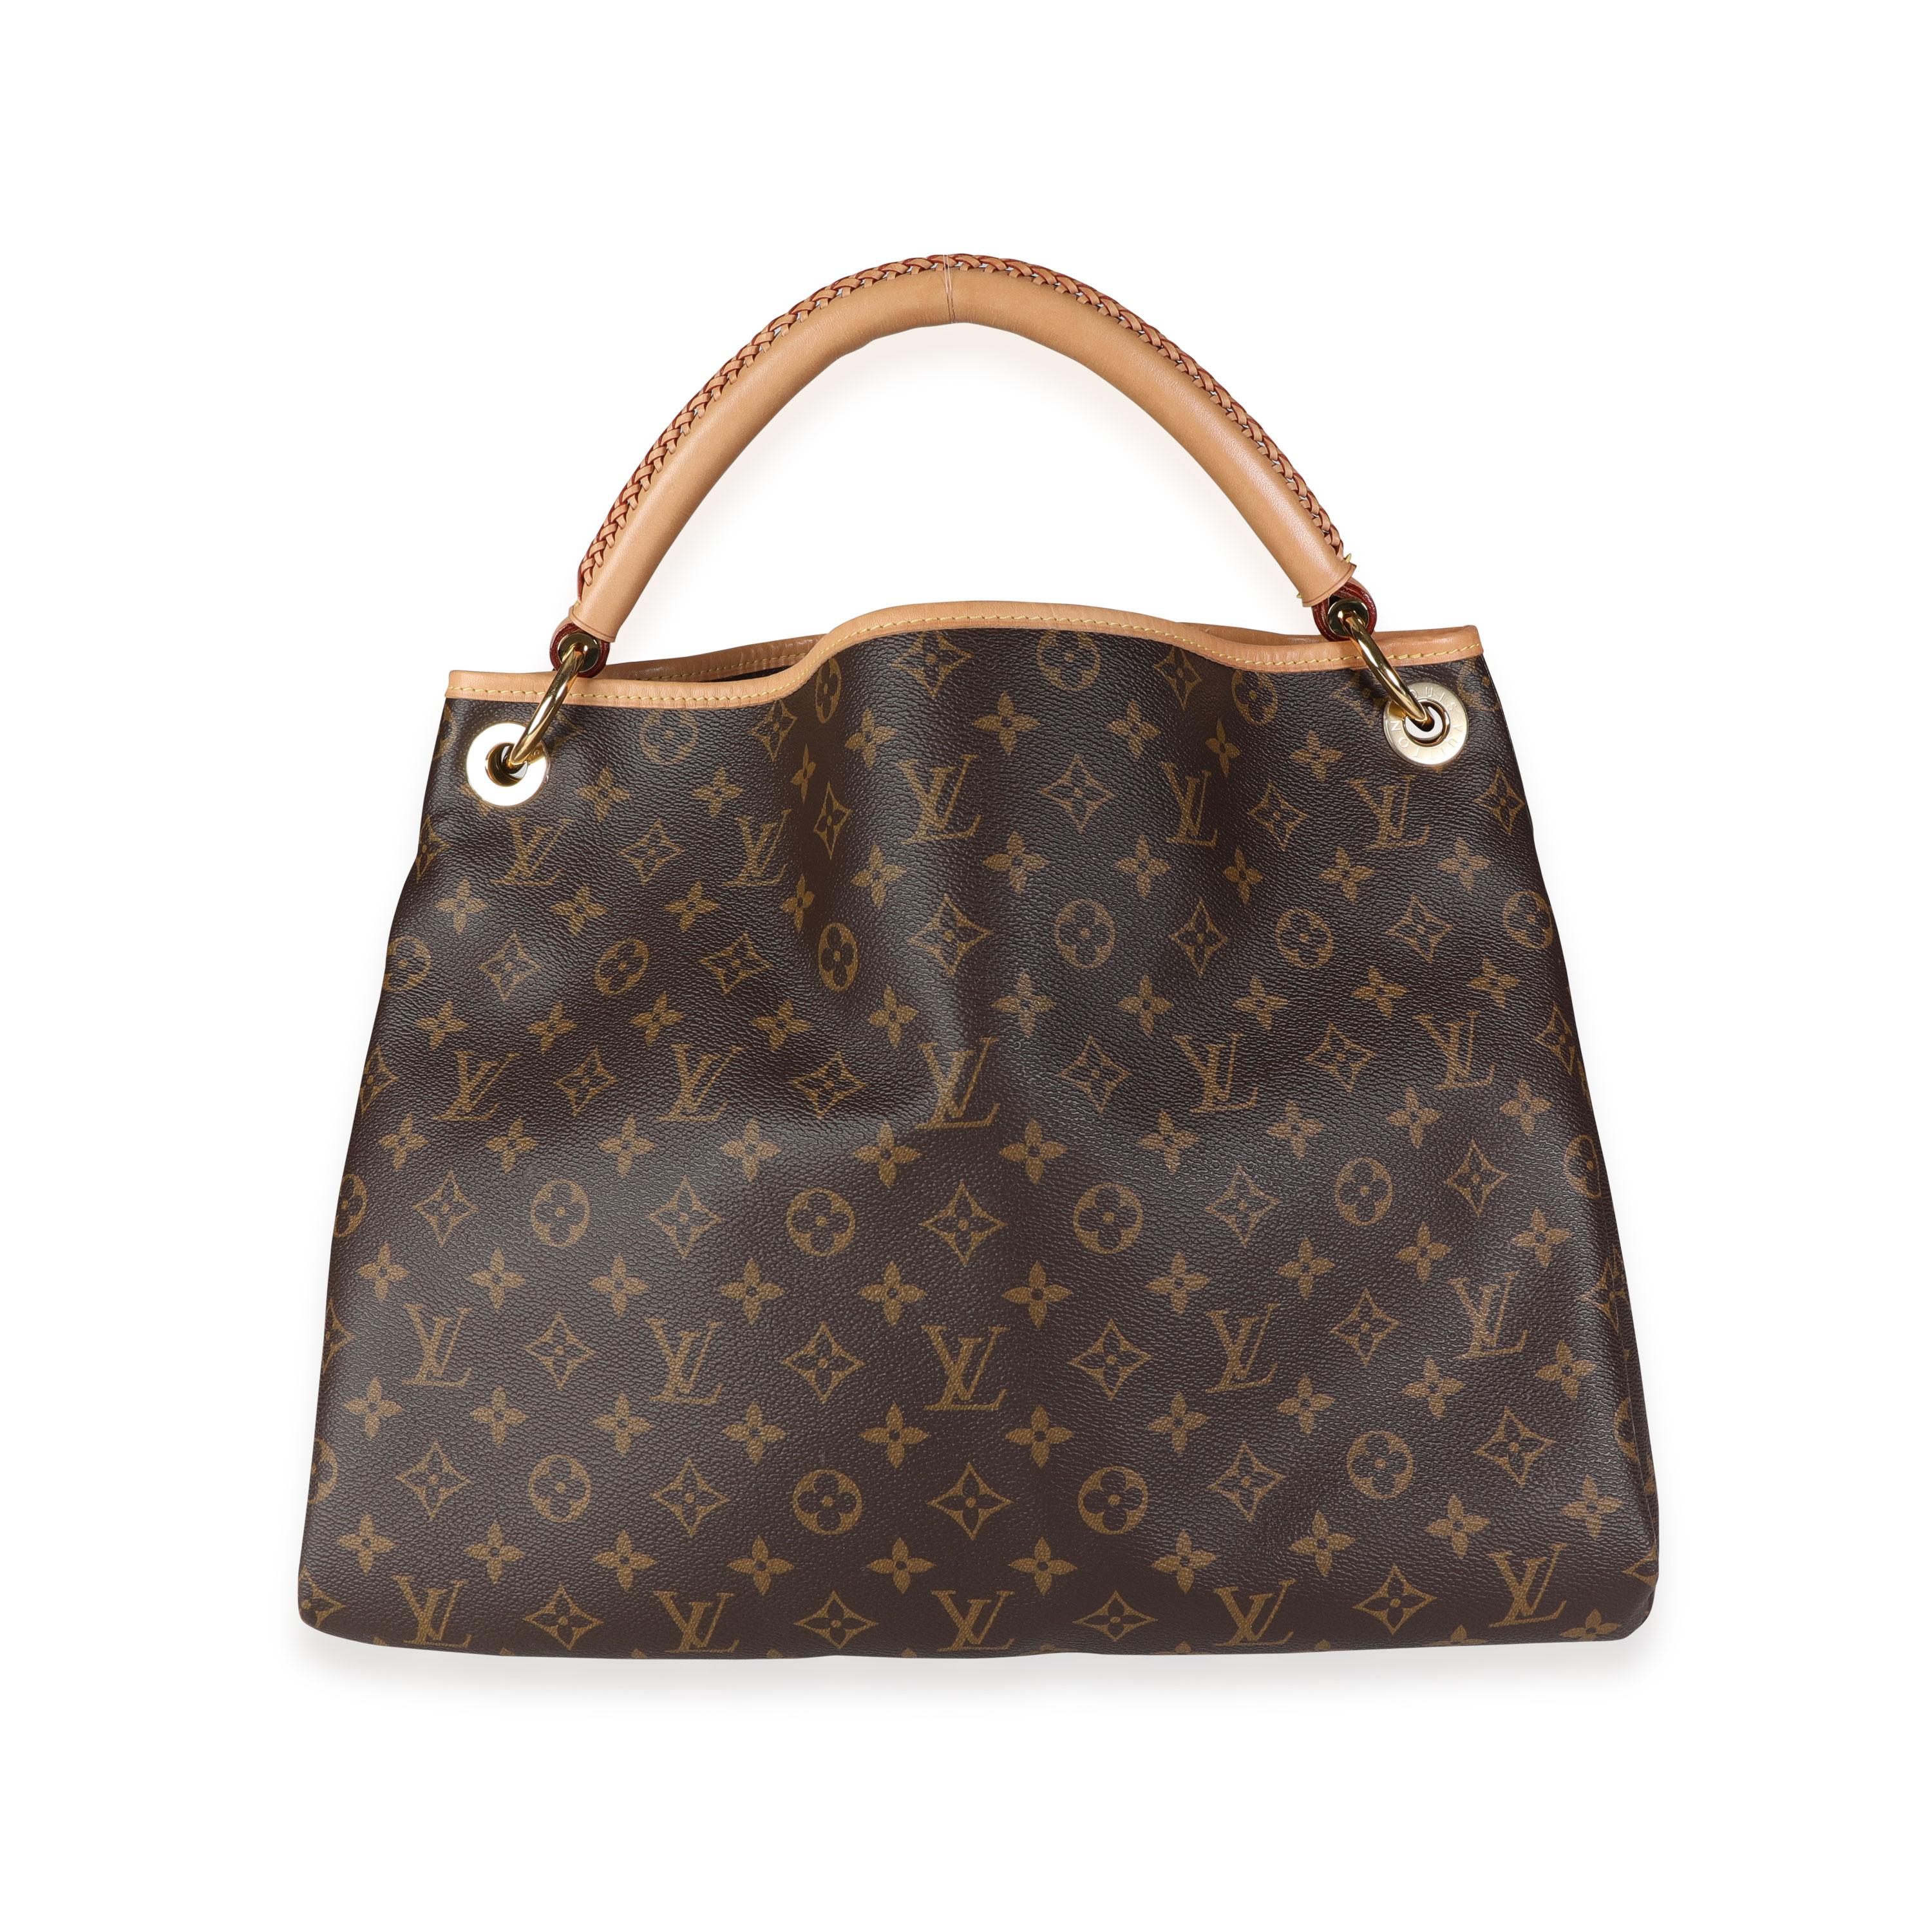 Listing Title: Louis Vuitton Monogram Canvas Artsy MM
SKU: 117654
MSRP: 2350.00
Condition: Pre-owned (3000)
Condition Description: The Artsy offers space and style: constructed in classic Monogram Canvas with an intricately woven leather